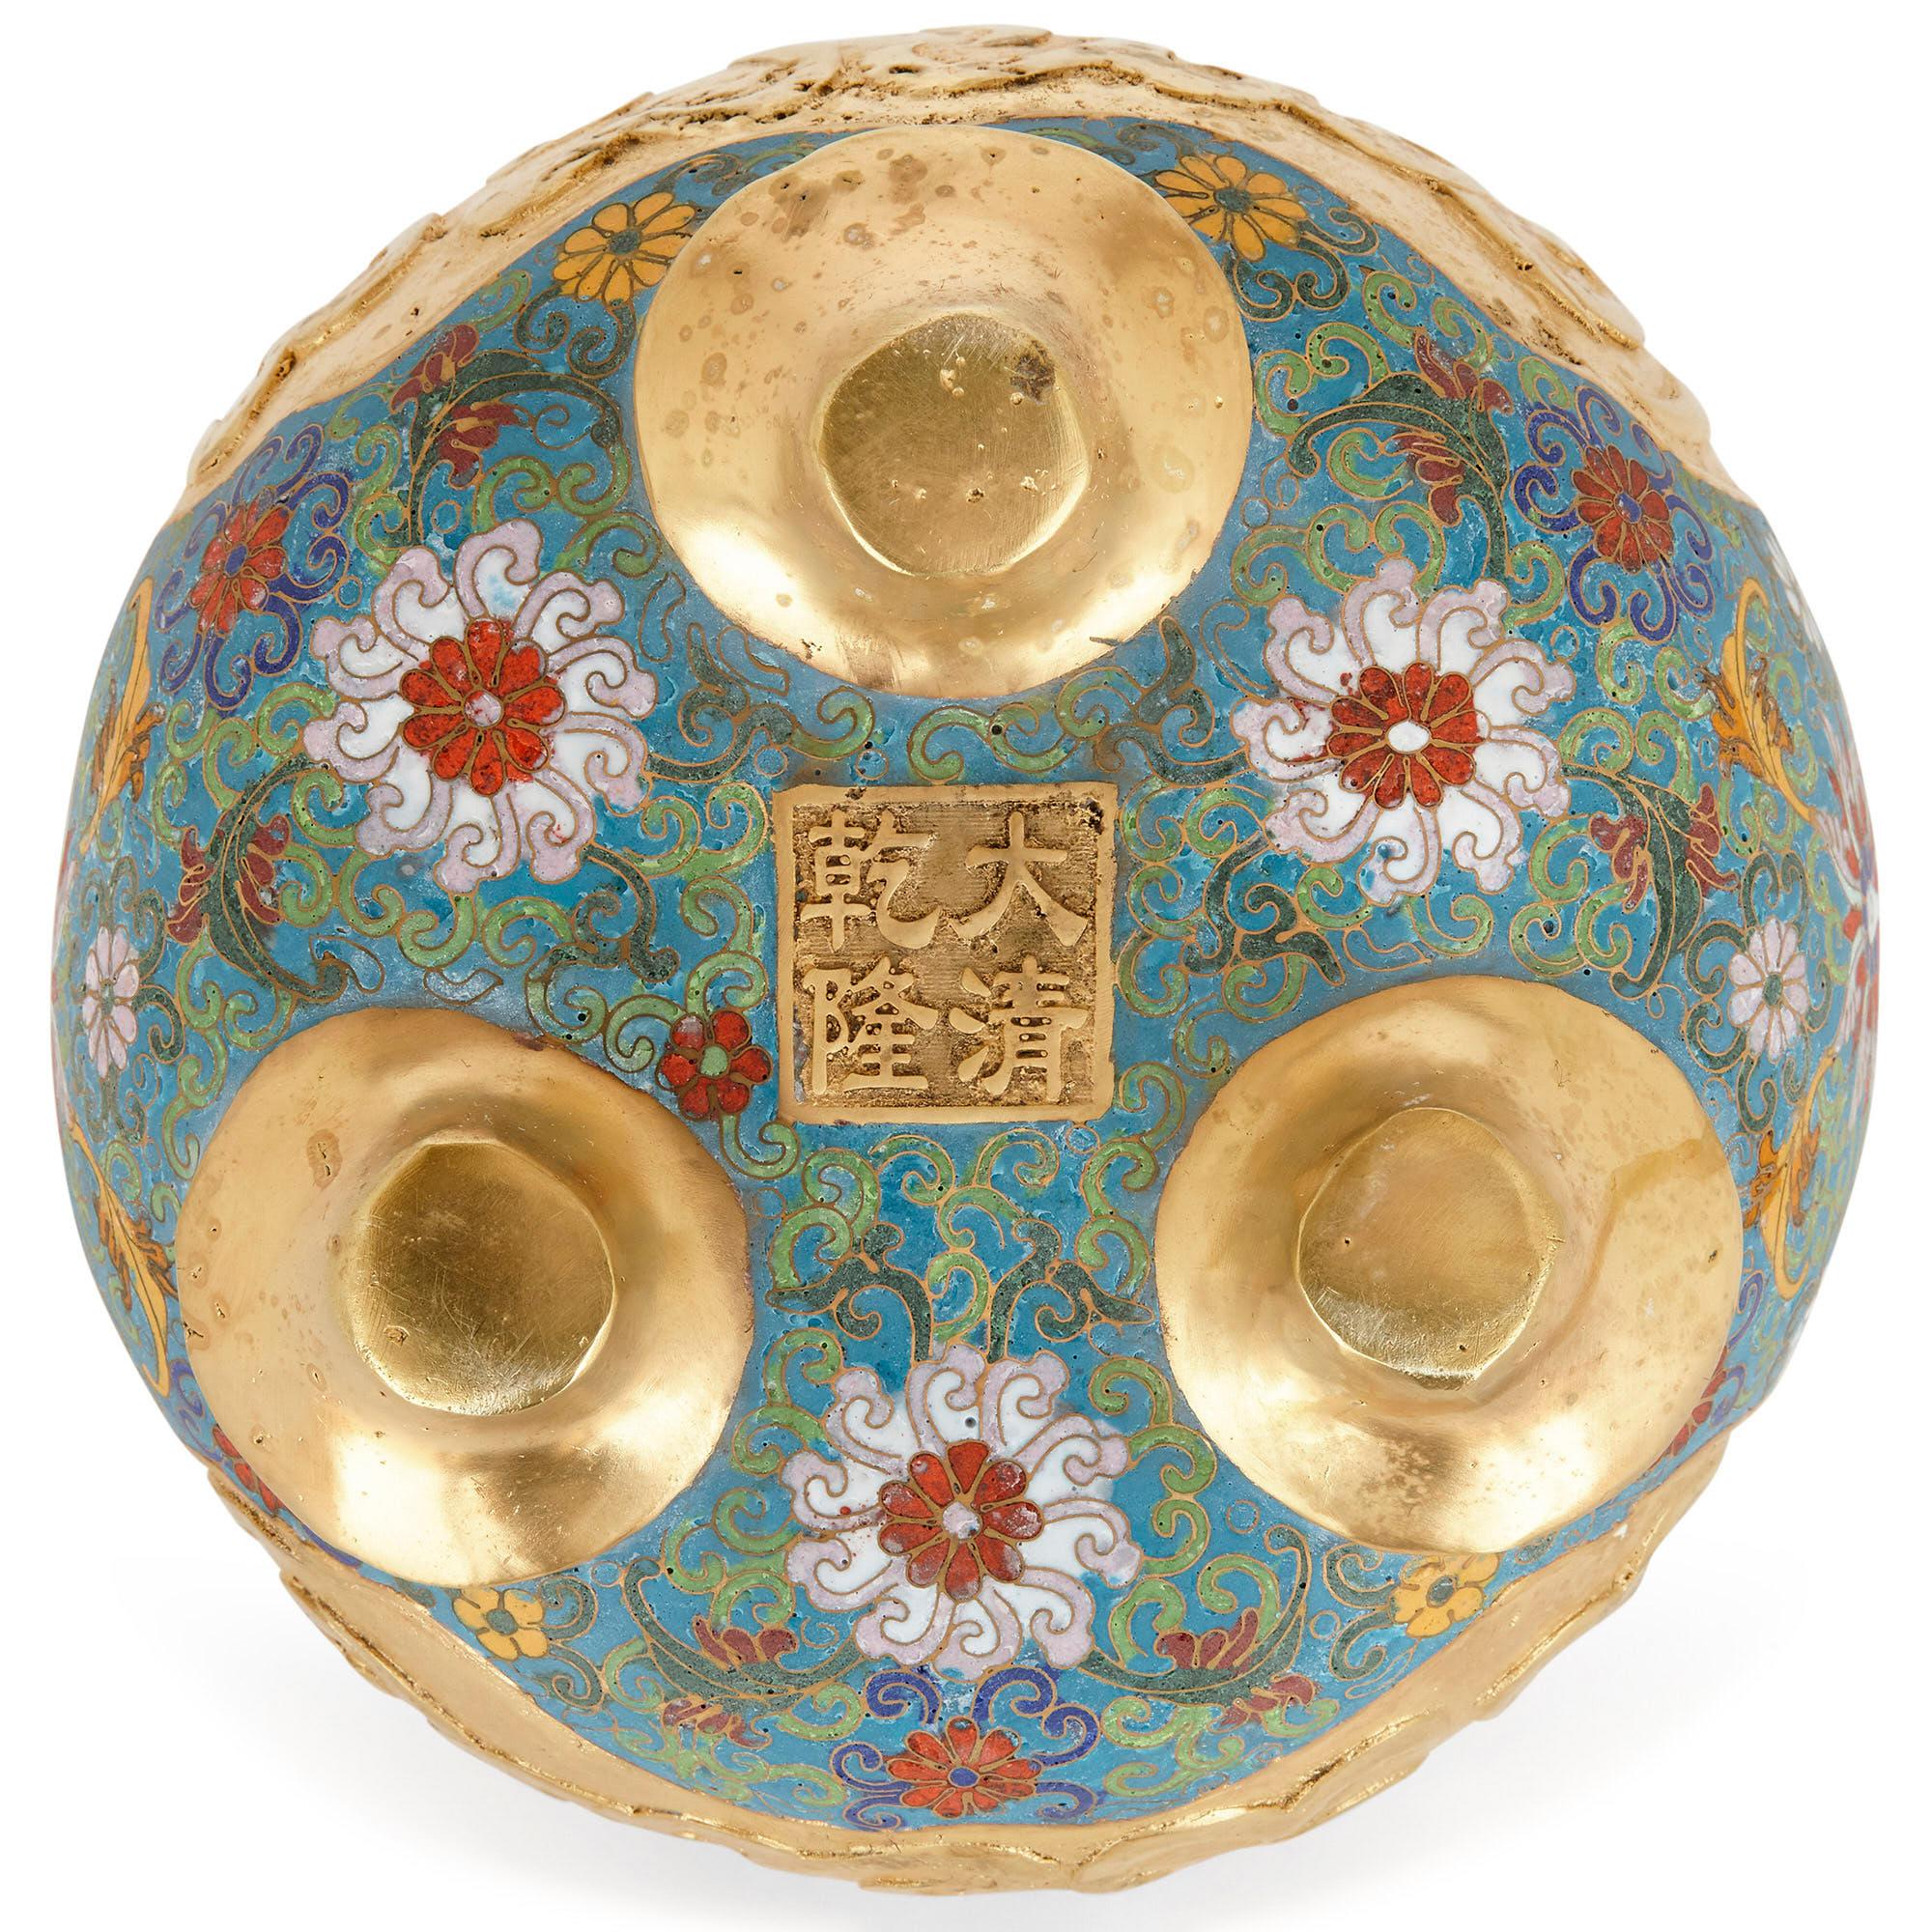 20th Century Chinese Ormolu and Cloisonné Enamel Vase for the Islamic Market For Sale